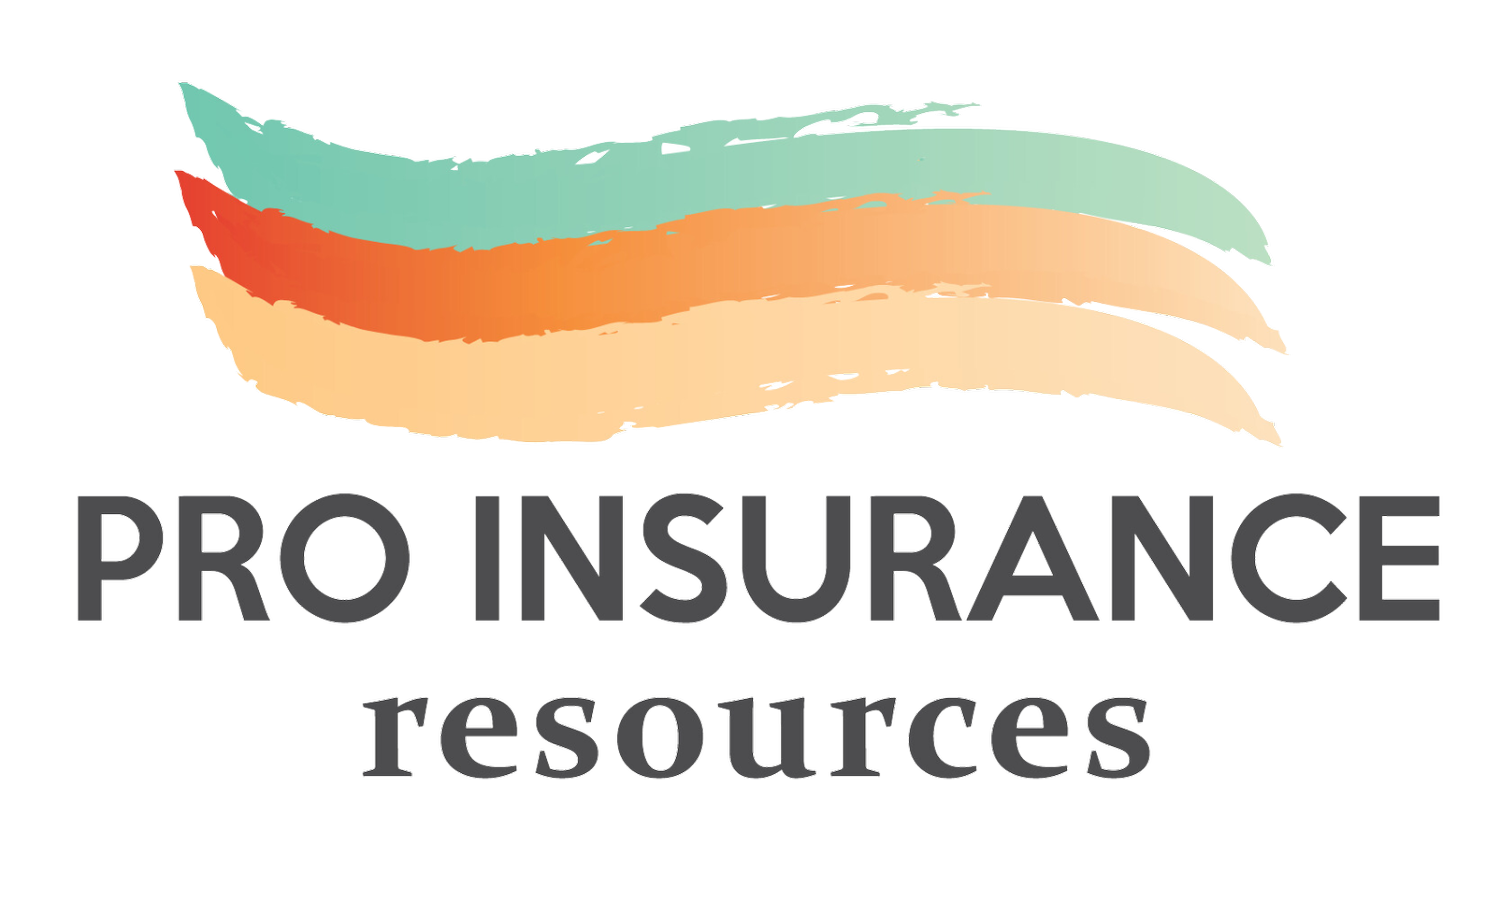 Pro Insurance Resources